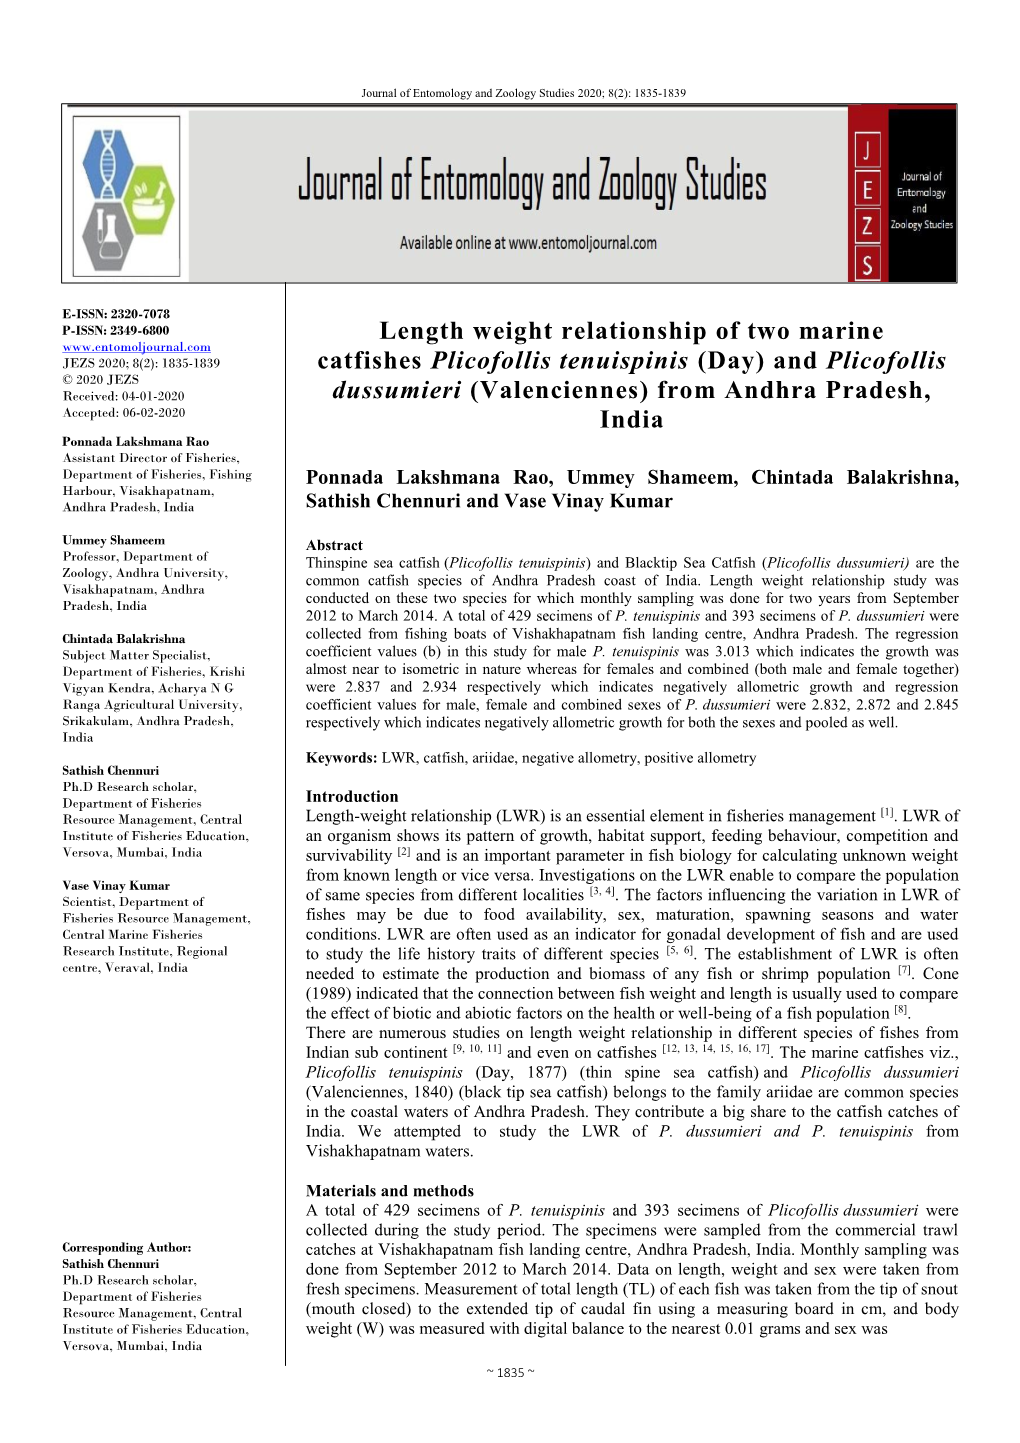 Length Weight Relationship of Two Marine Catfishes Plicofollis Tenuispinis